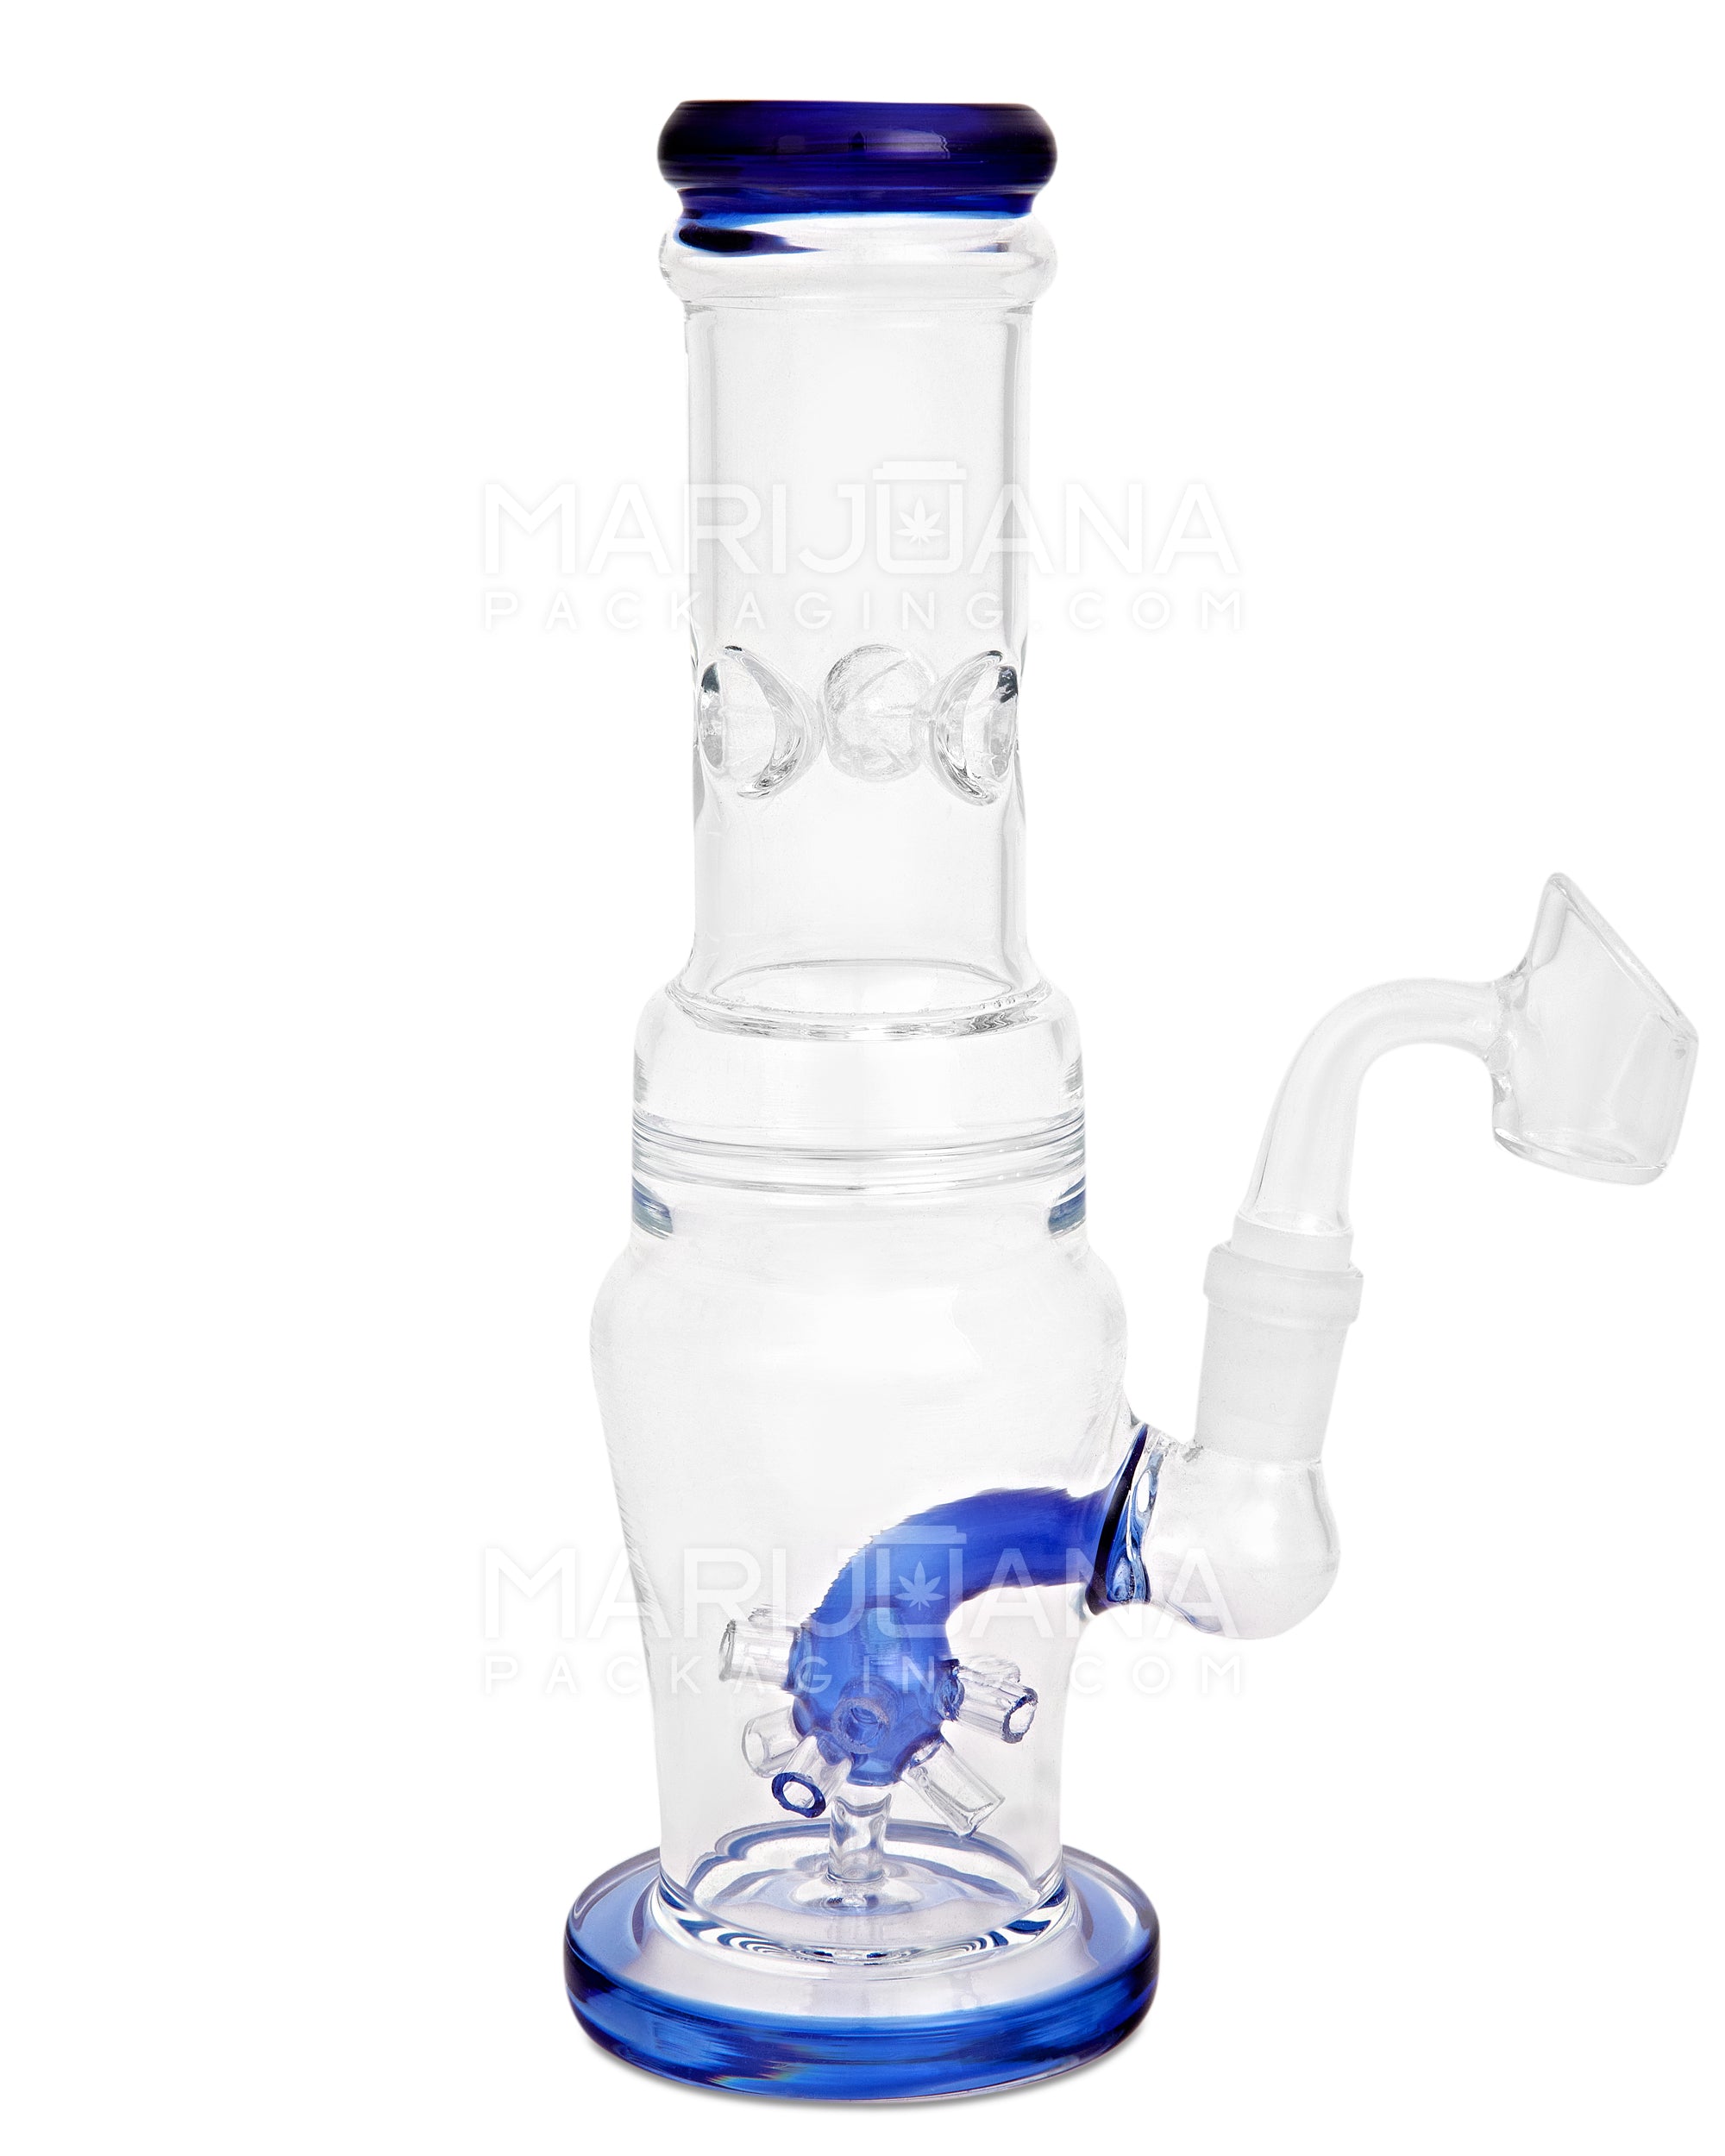 Straight Neck Atomic Perc Dab Rig w/ Ice Catcher & Thick Base | 10in Tall - 14mm Banger - Blue - 1